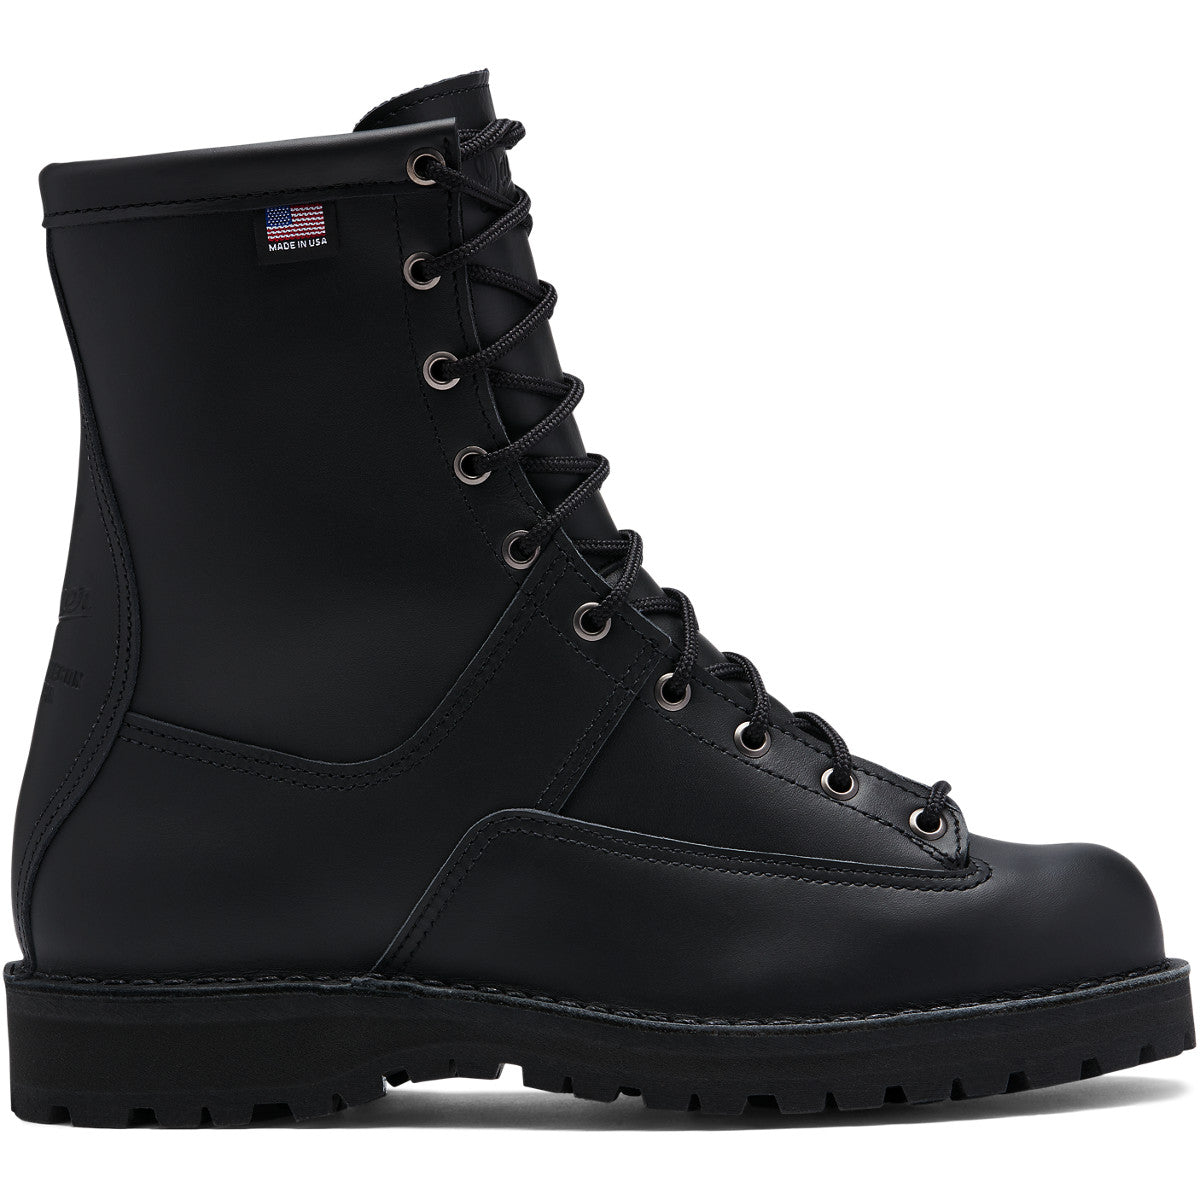 Danner Recon 8 Inch Waterproof Insulated Police Boot (Black)